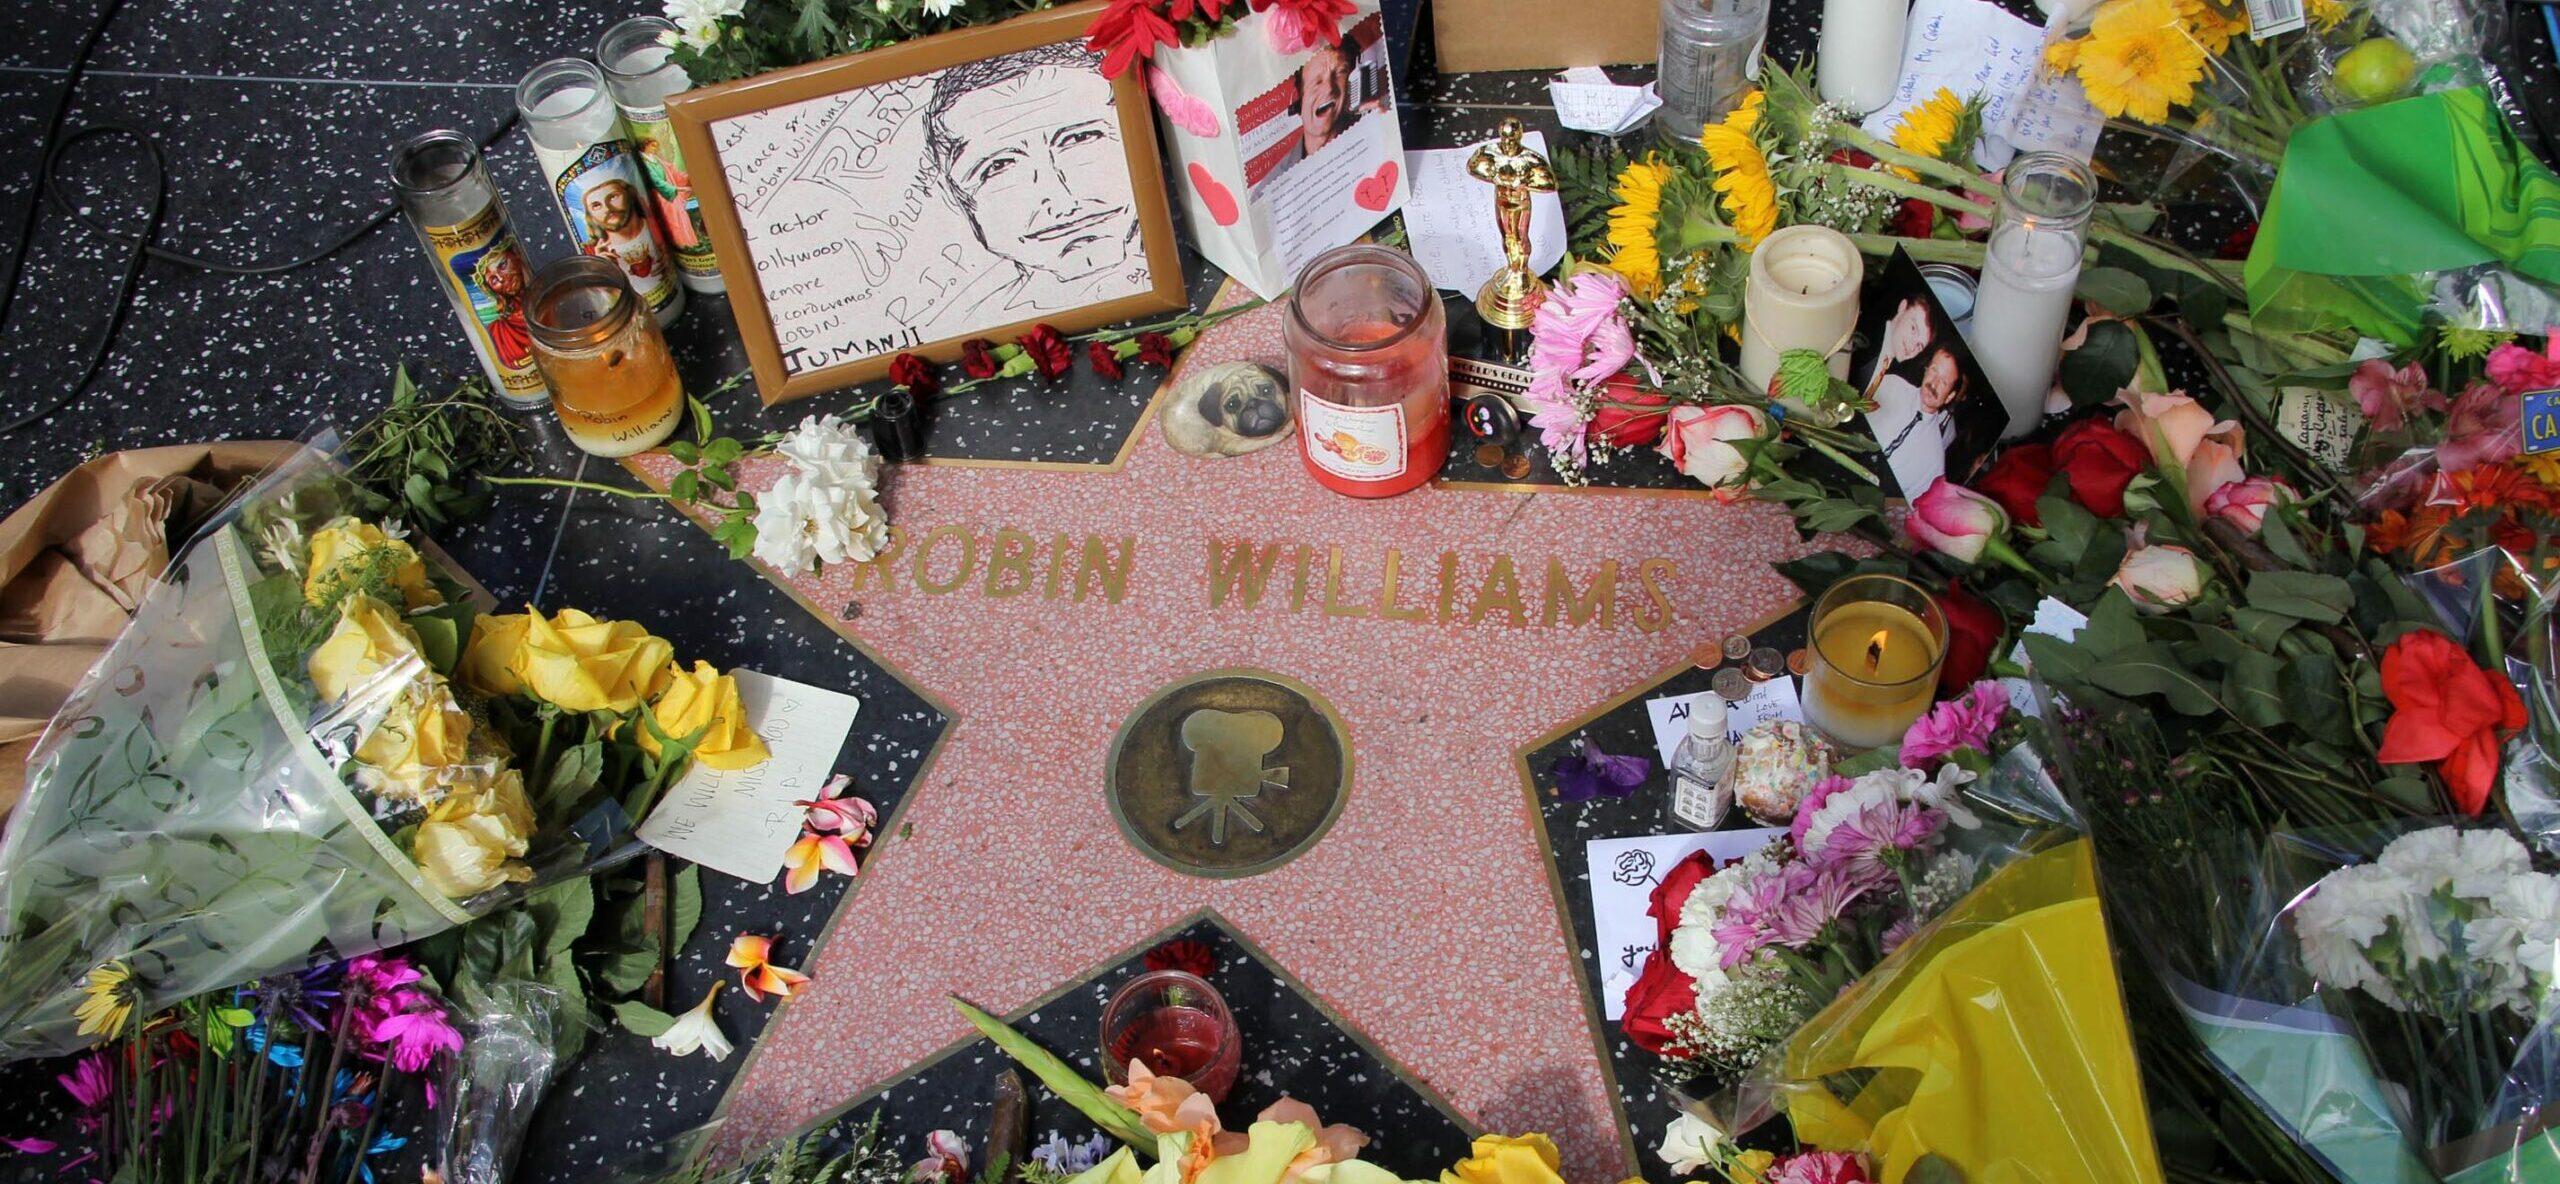 Robin Williams Star on the Walk of Fame